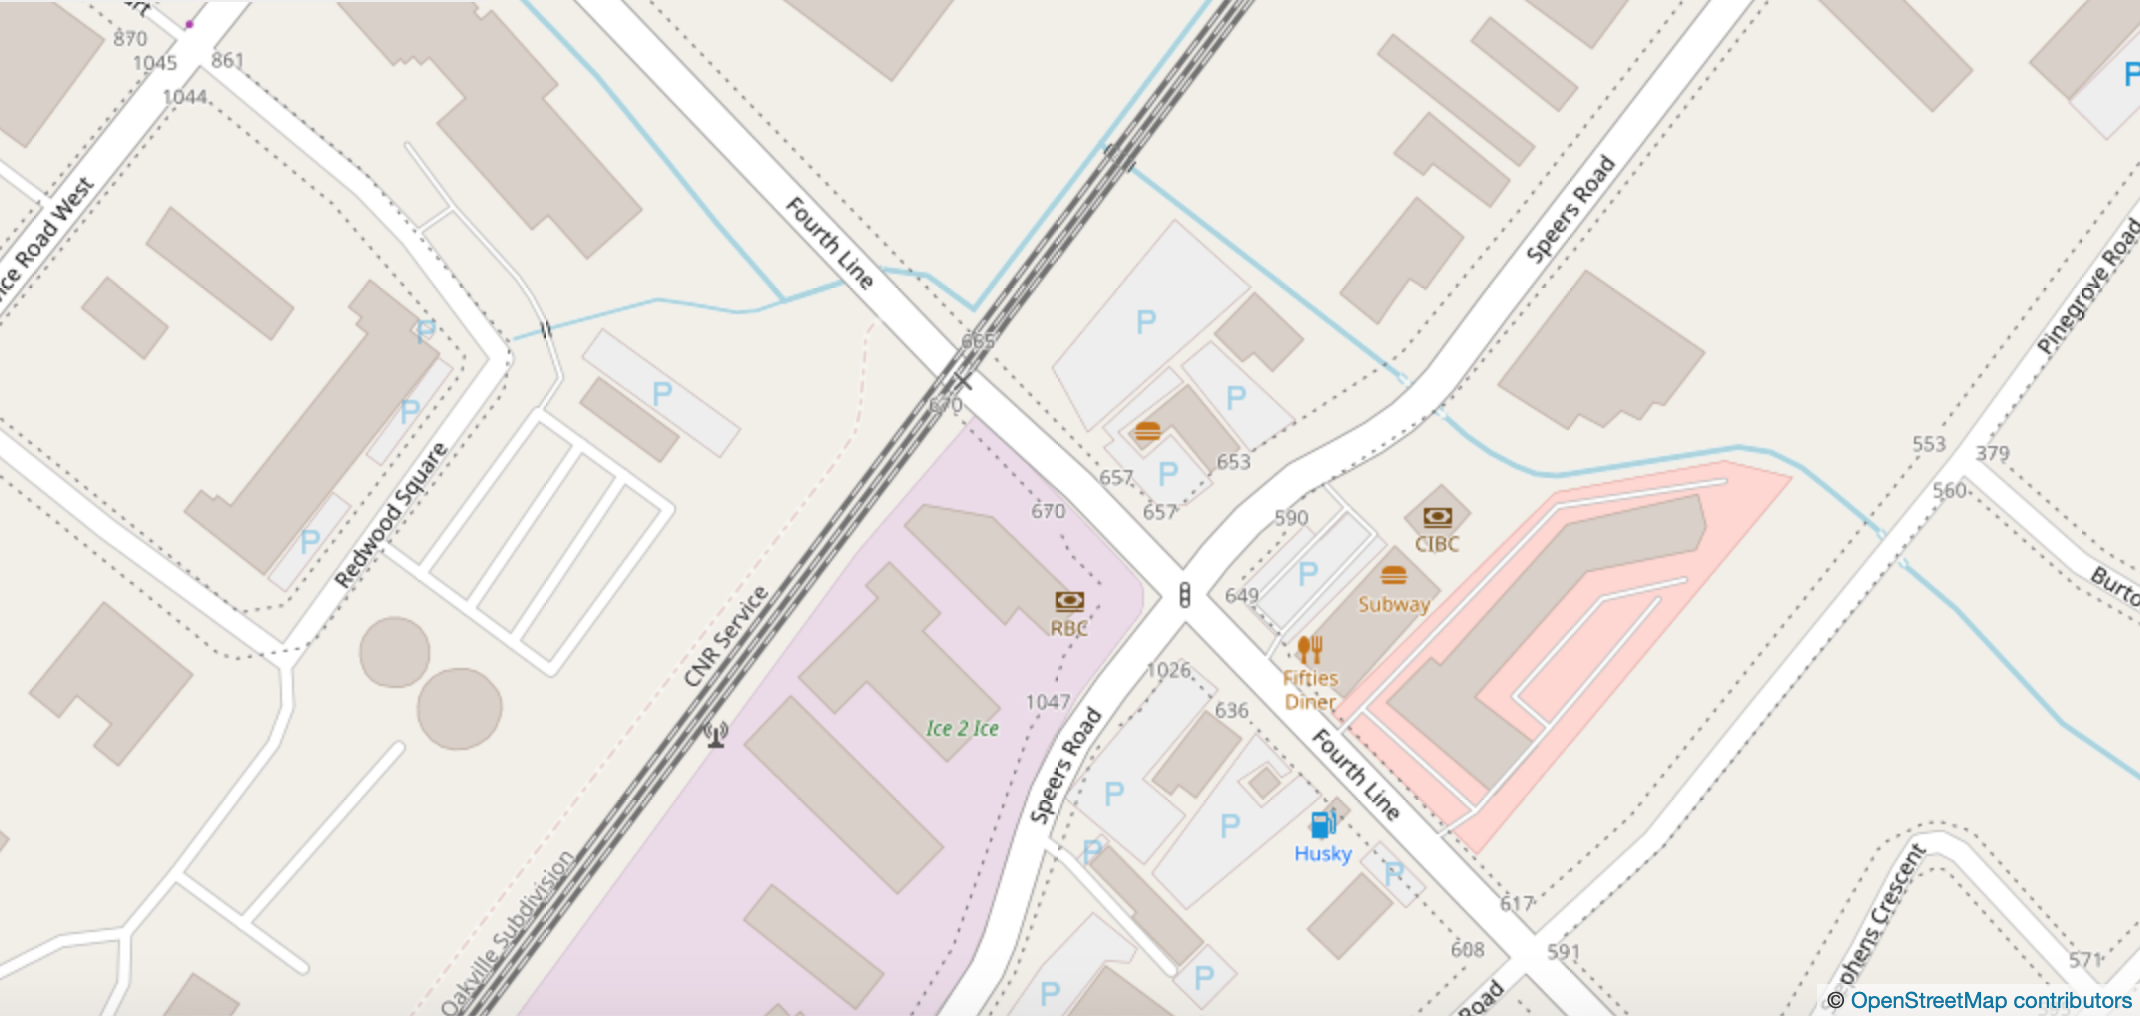 pedestrian train fatality | © OpenStreetMap.org contributors CC BY-SA (openstreetmap.org - copyright)